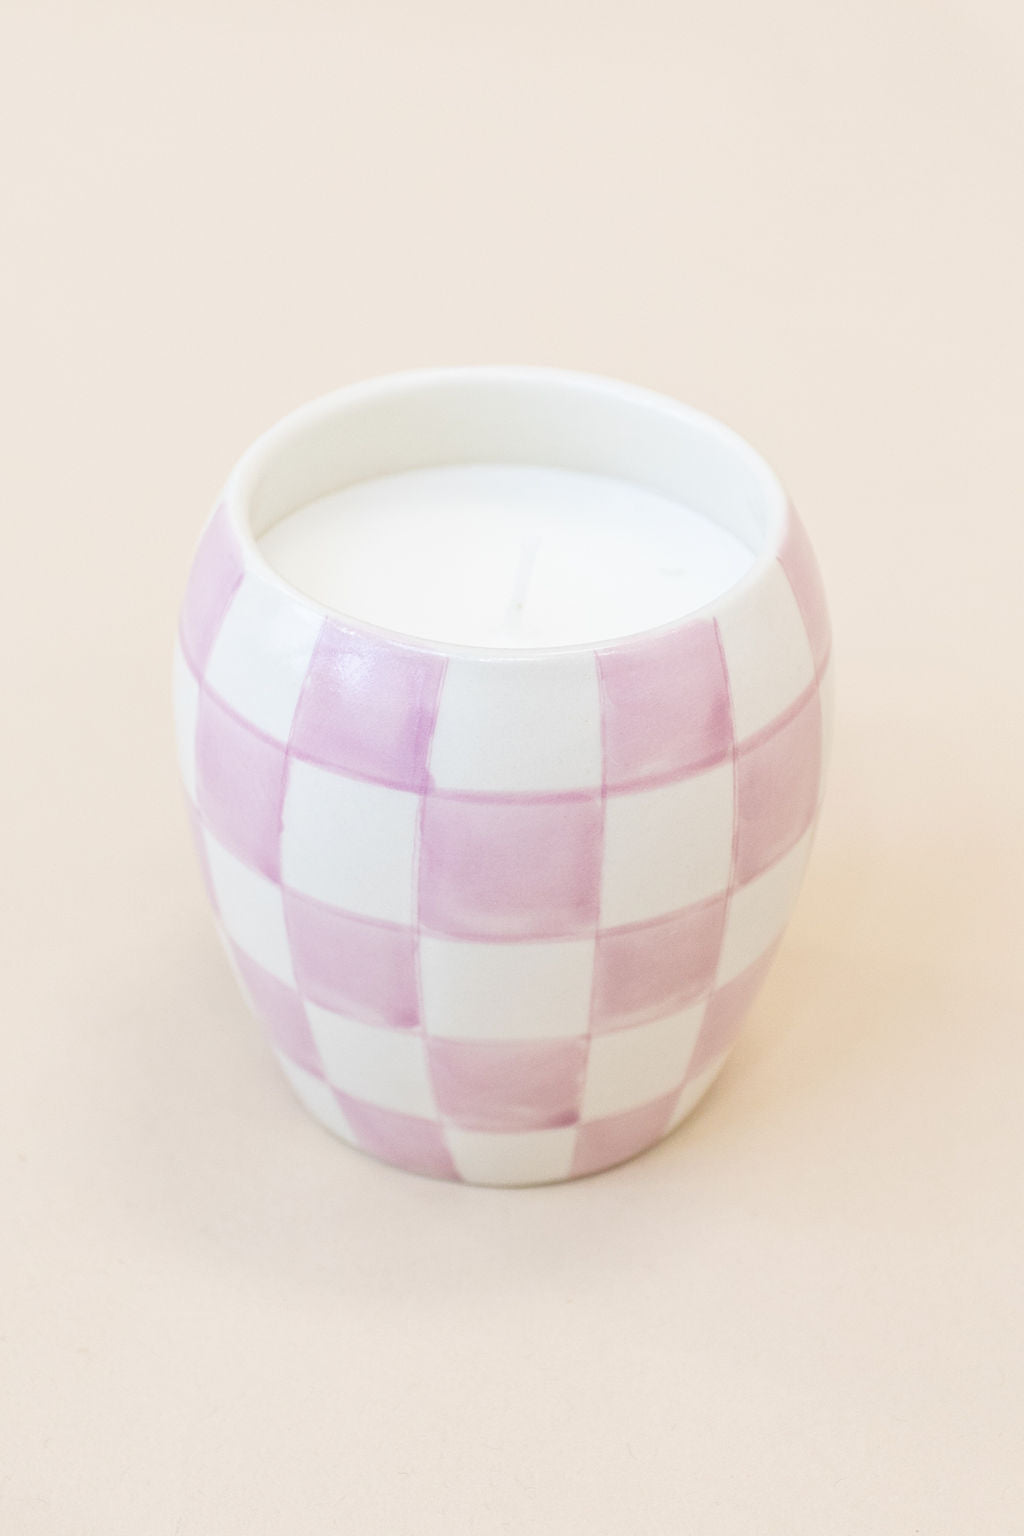 Paddywax | Checkmate Candle | Lavender Mimosa - Poppy and Stella